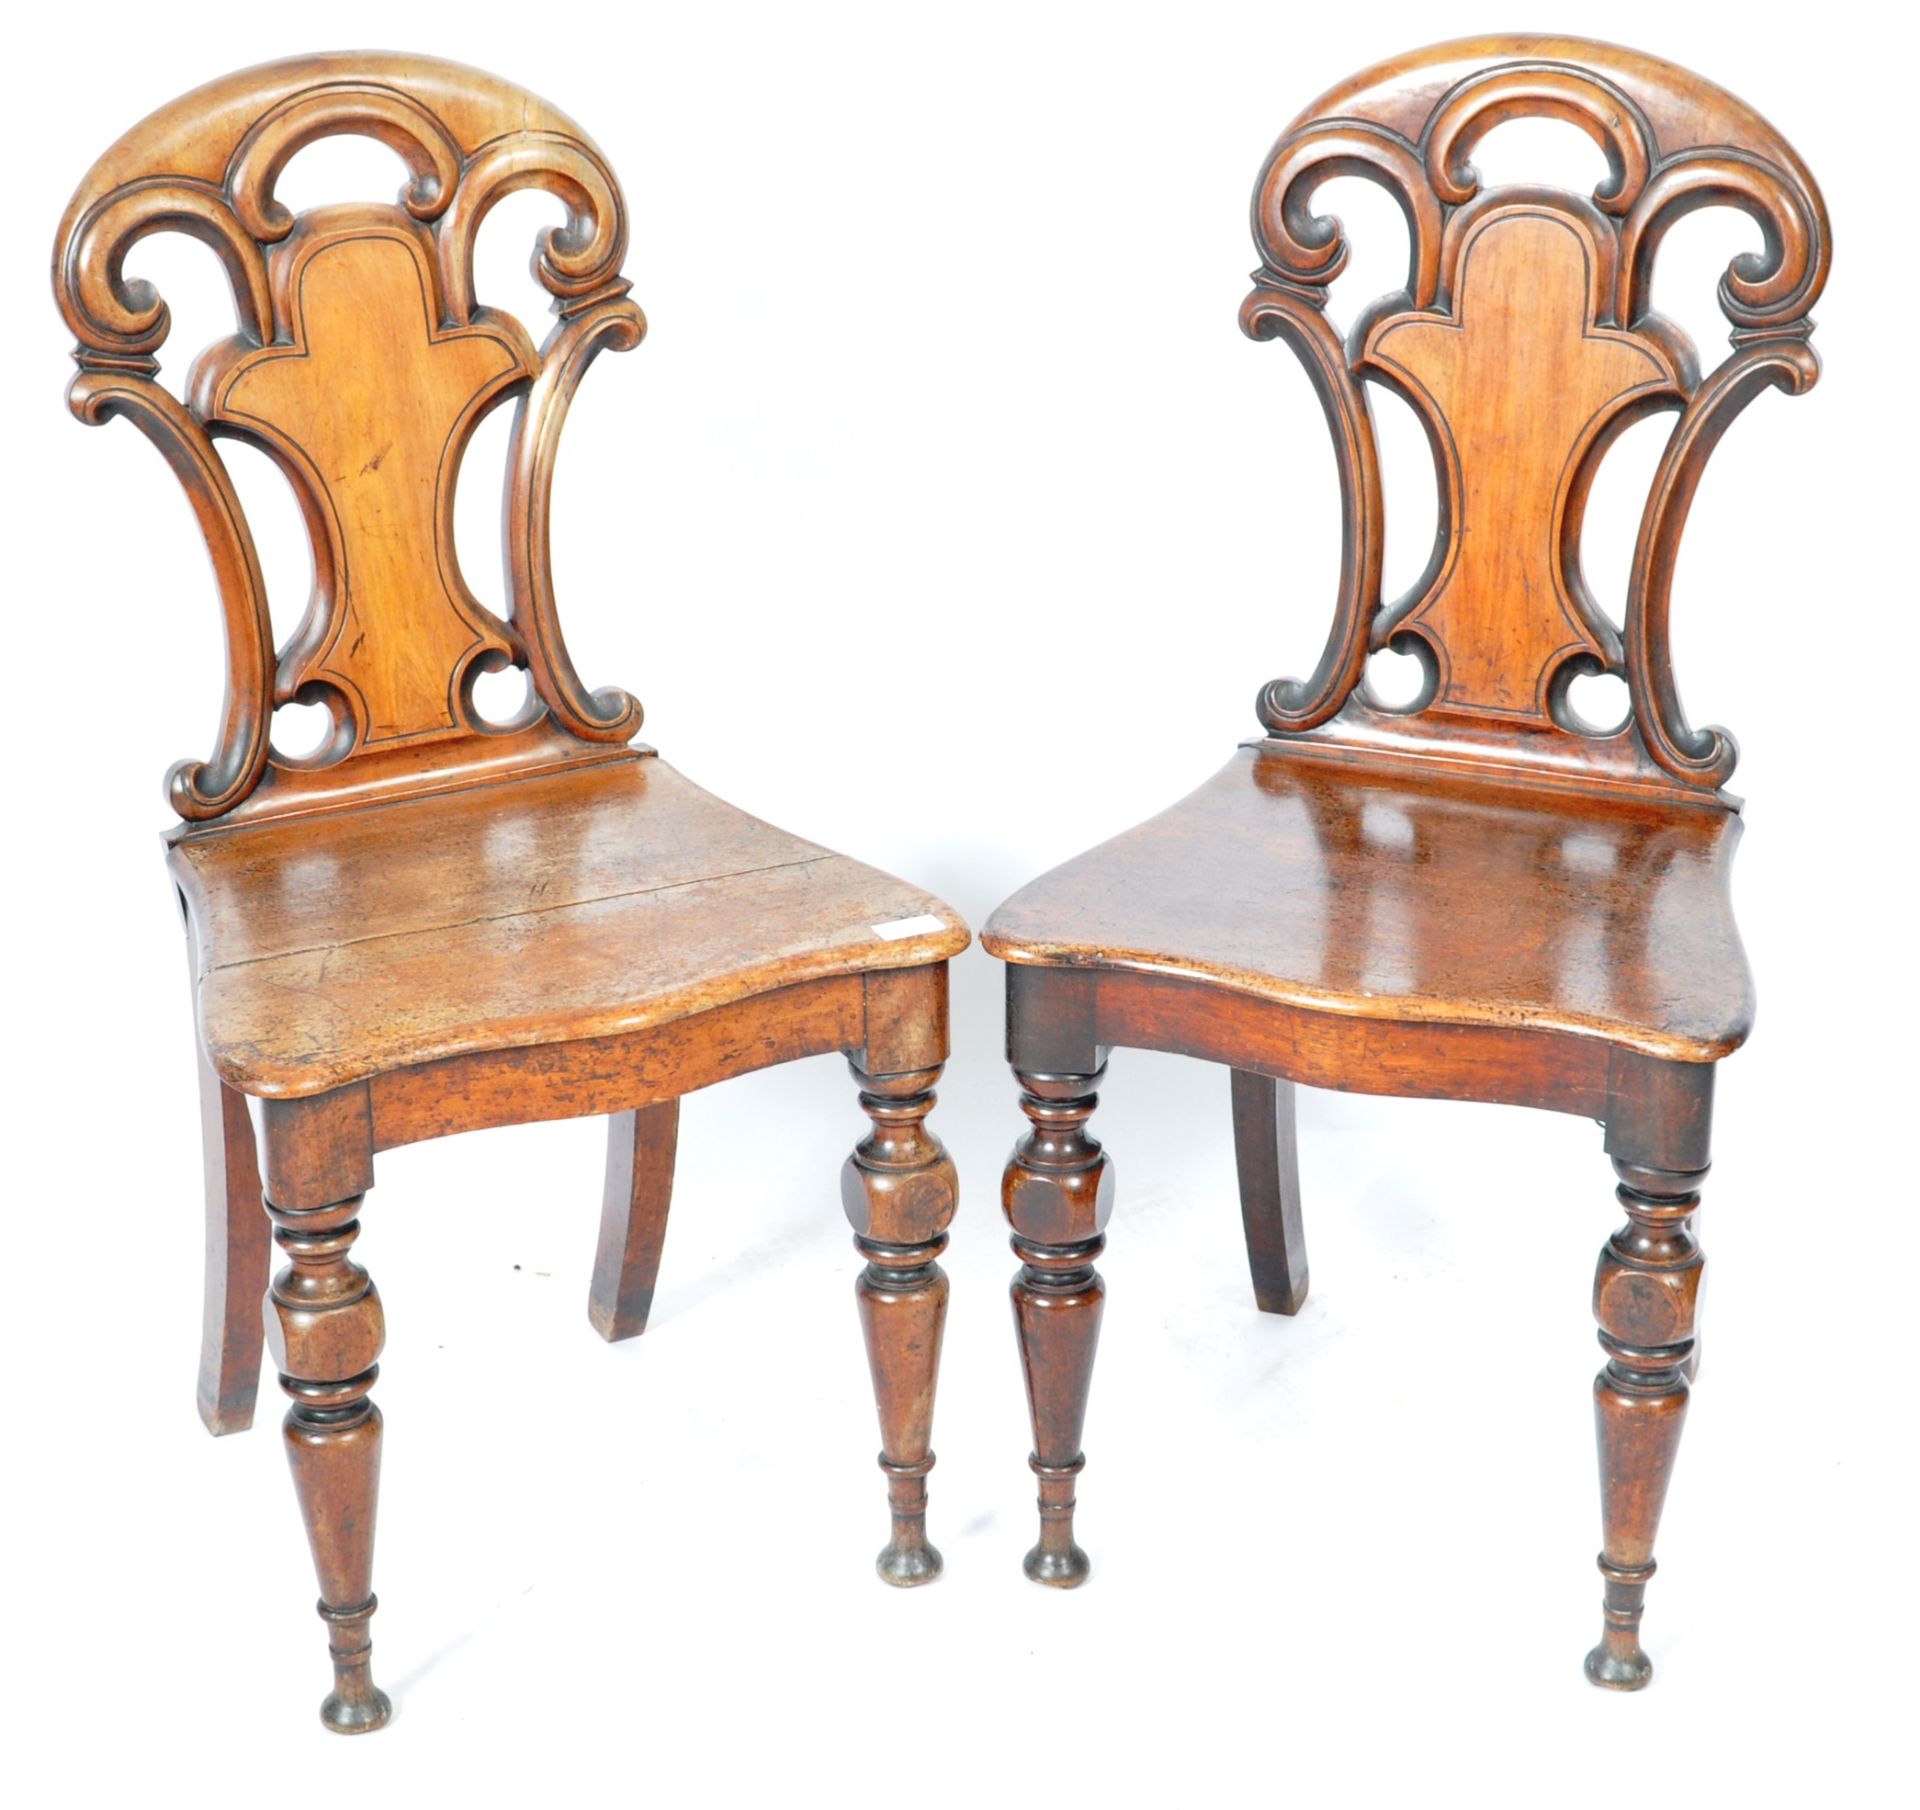 MATCHING PAIR OF VICTORIAN MAHOGANY CARVED HALL CHAIRS - Image 3 of 8